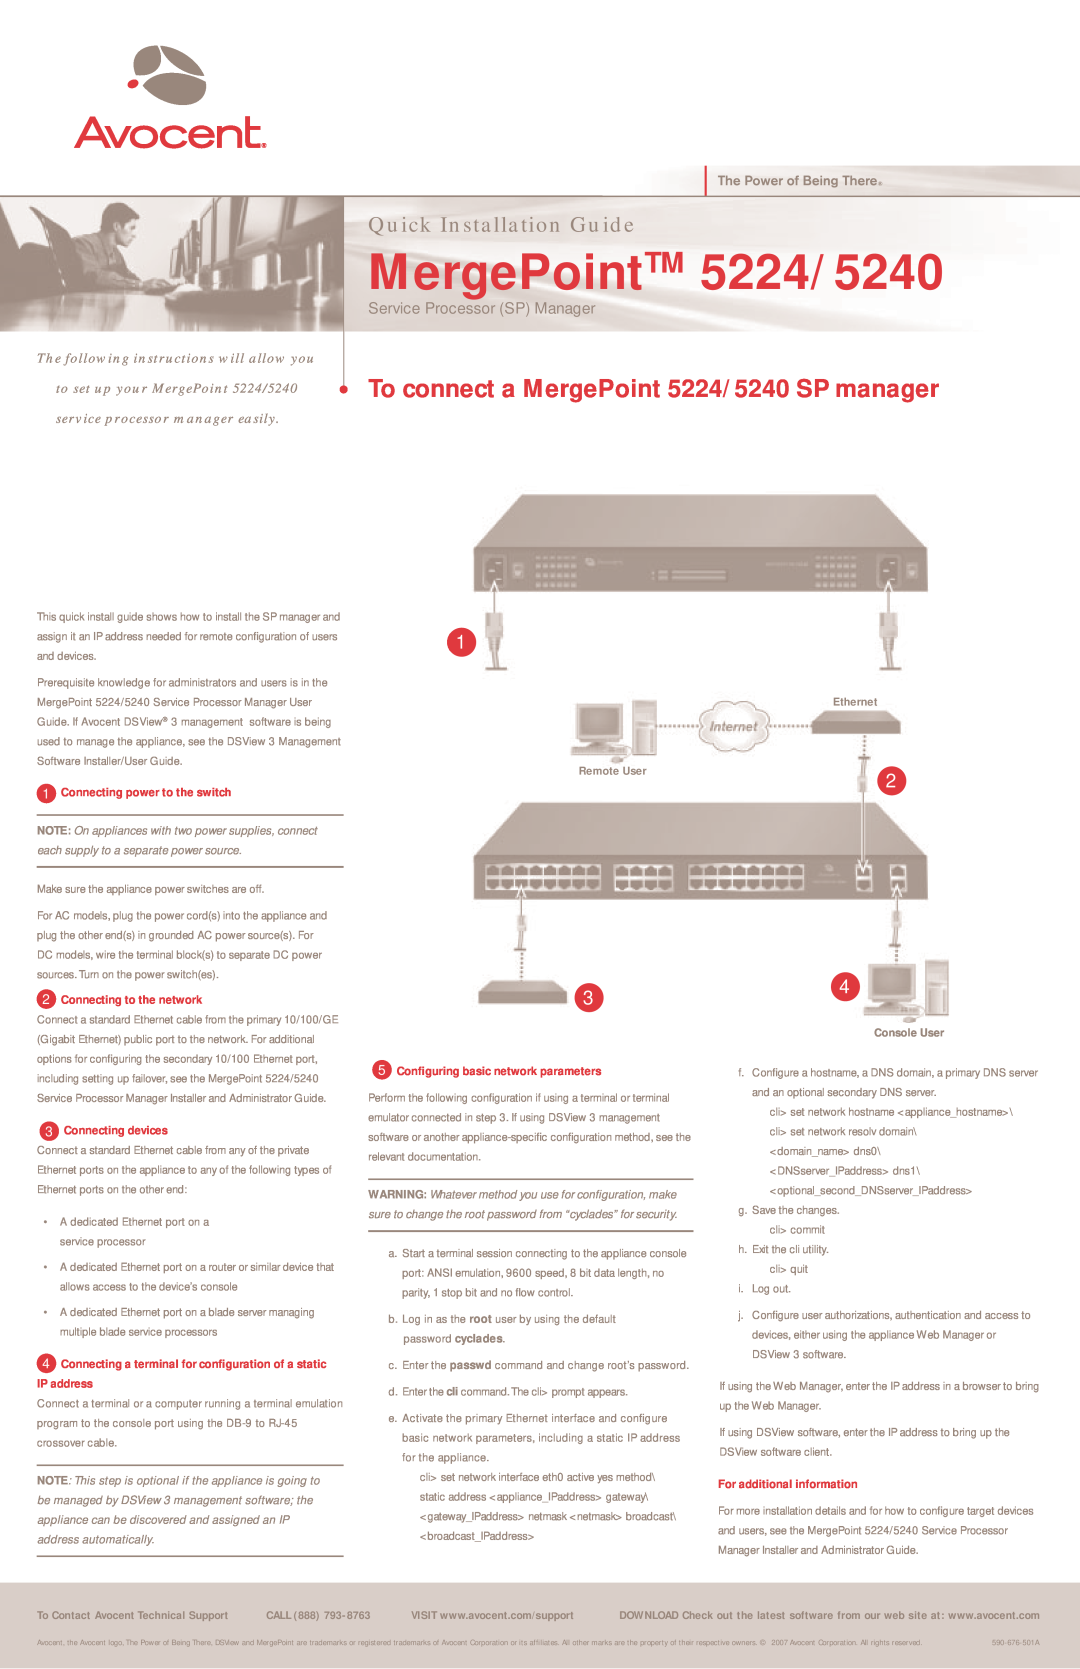 Avocent manual MergePointTM 5224/5240, To connect a MergePoint 5224/5240 SP manager, Quick Installation Guide, Call 